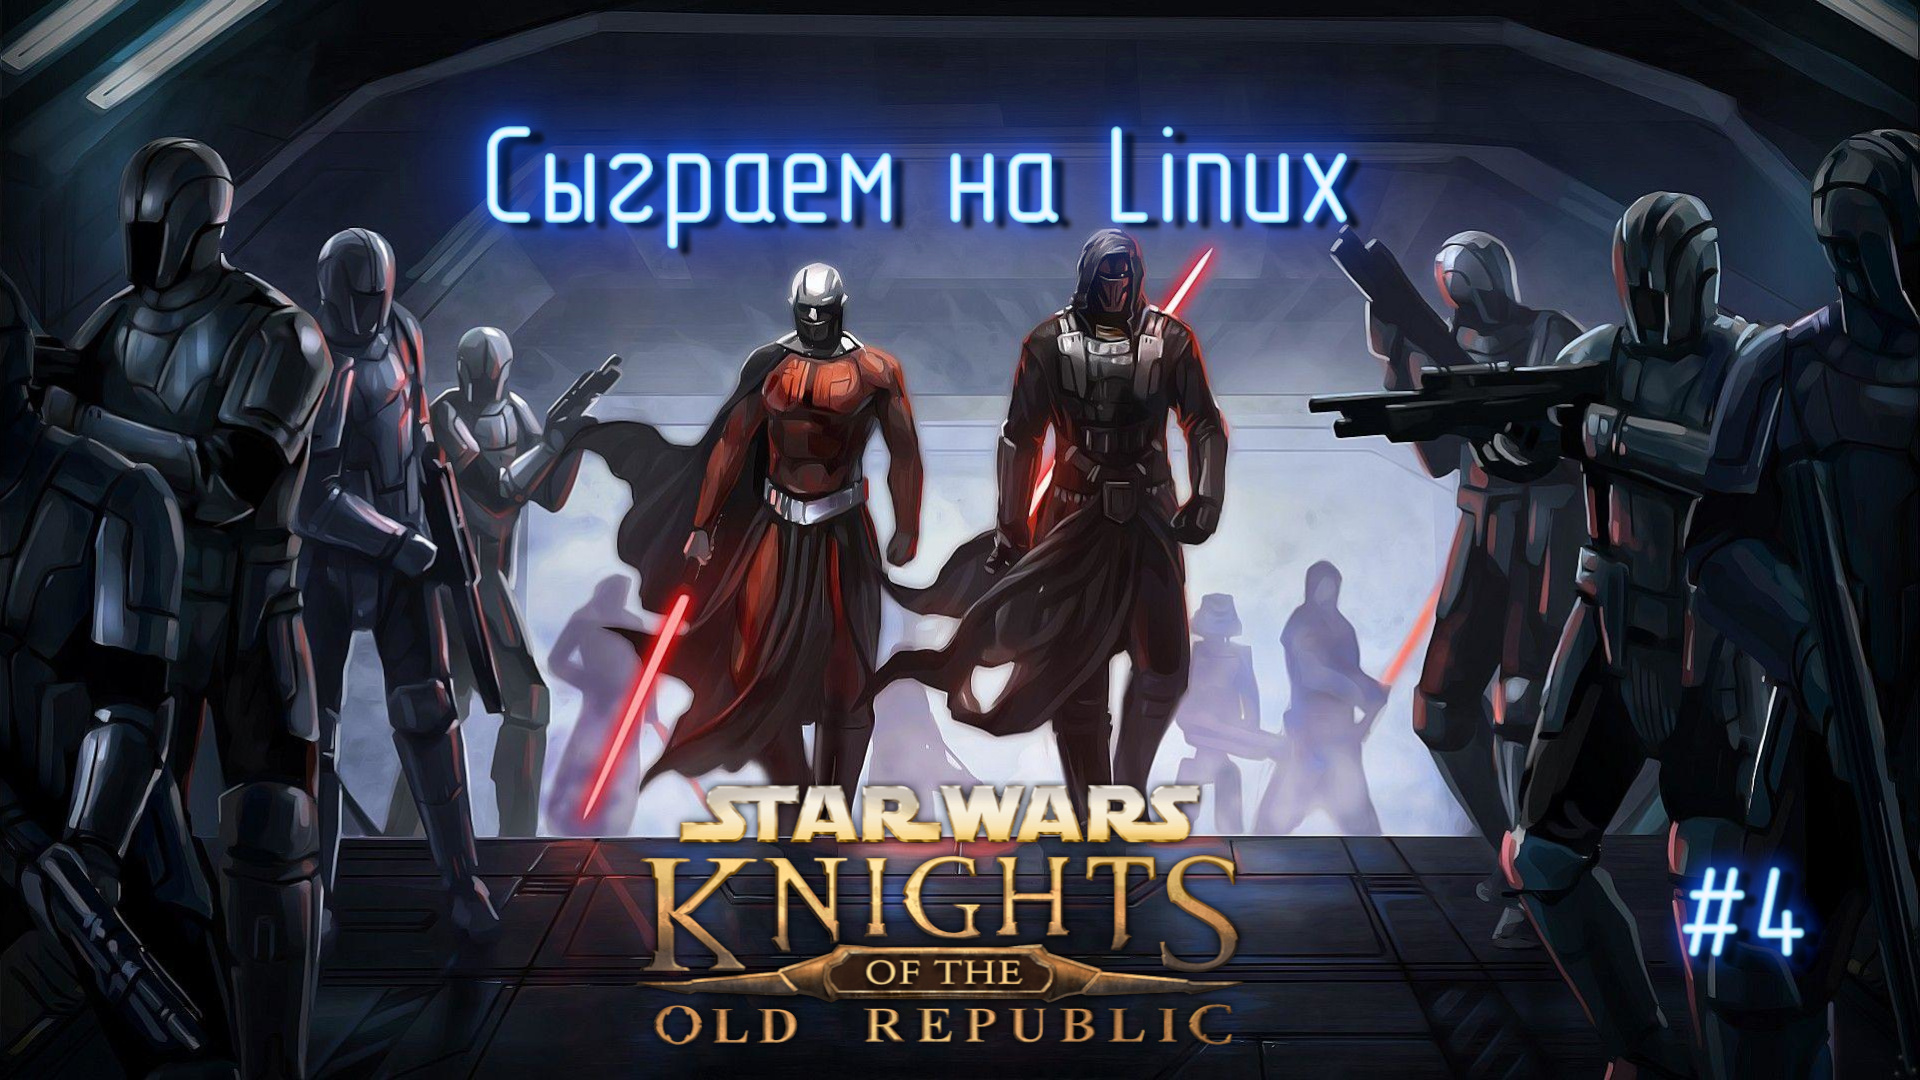 Star wars knight of the old republic 2 русификатор steam фото 42